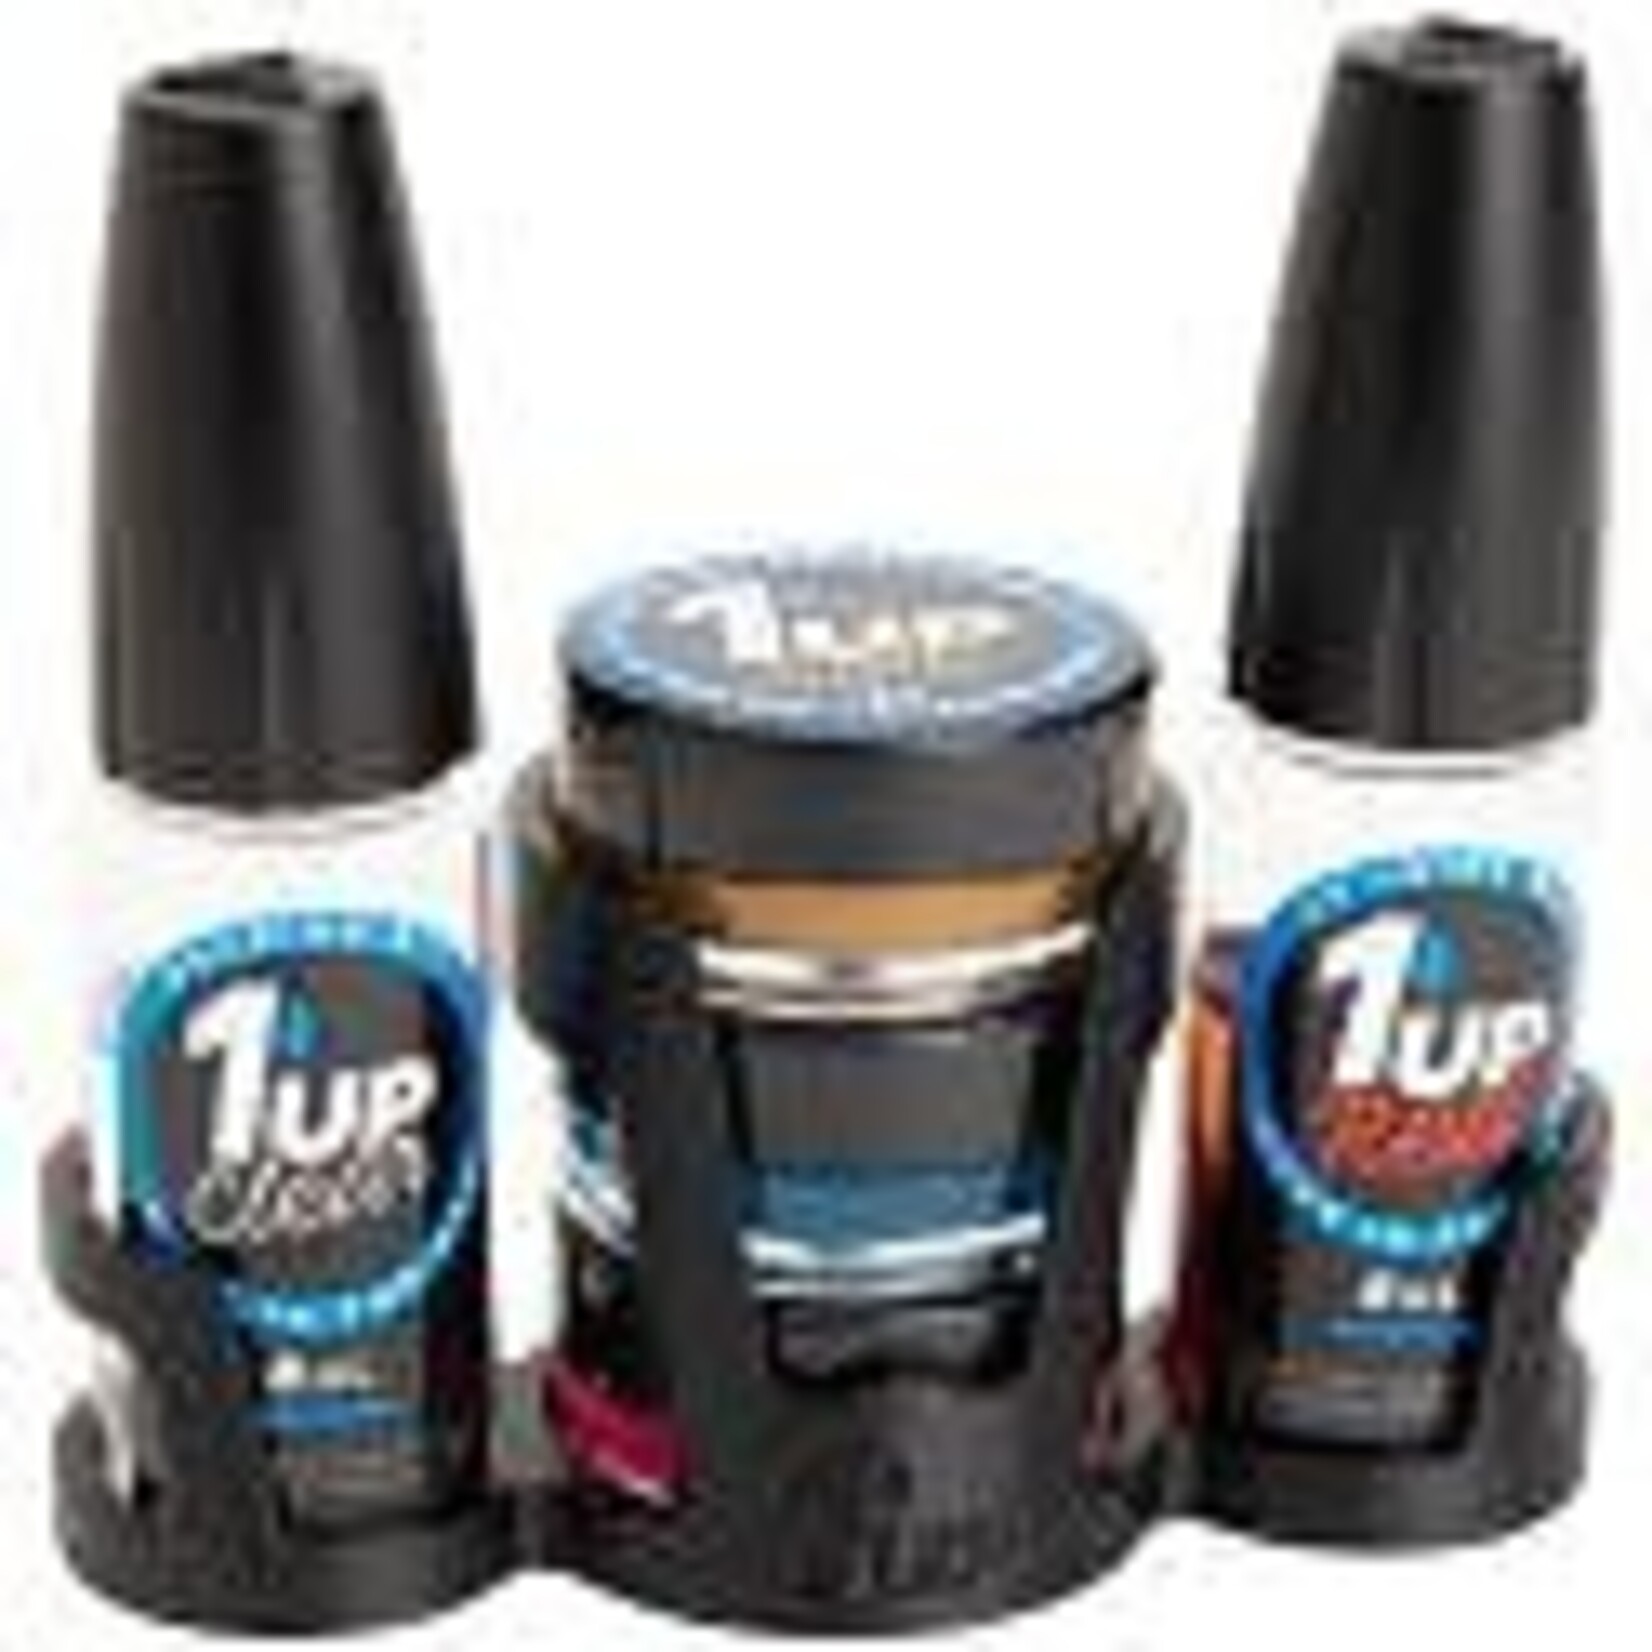 1UP Racing 1UP120502  Pro Pack w/ Pit Stand (Assorted Lubes)